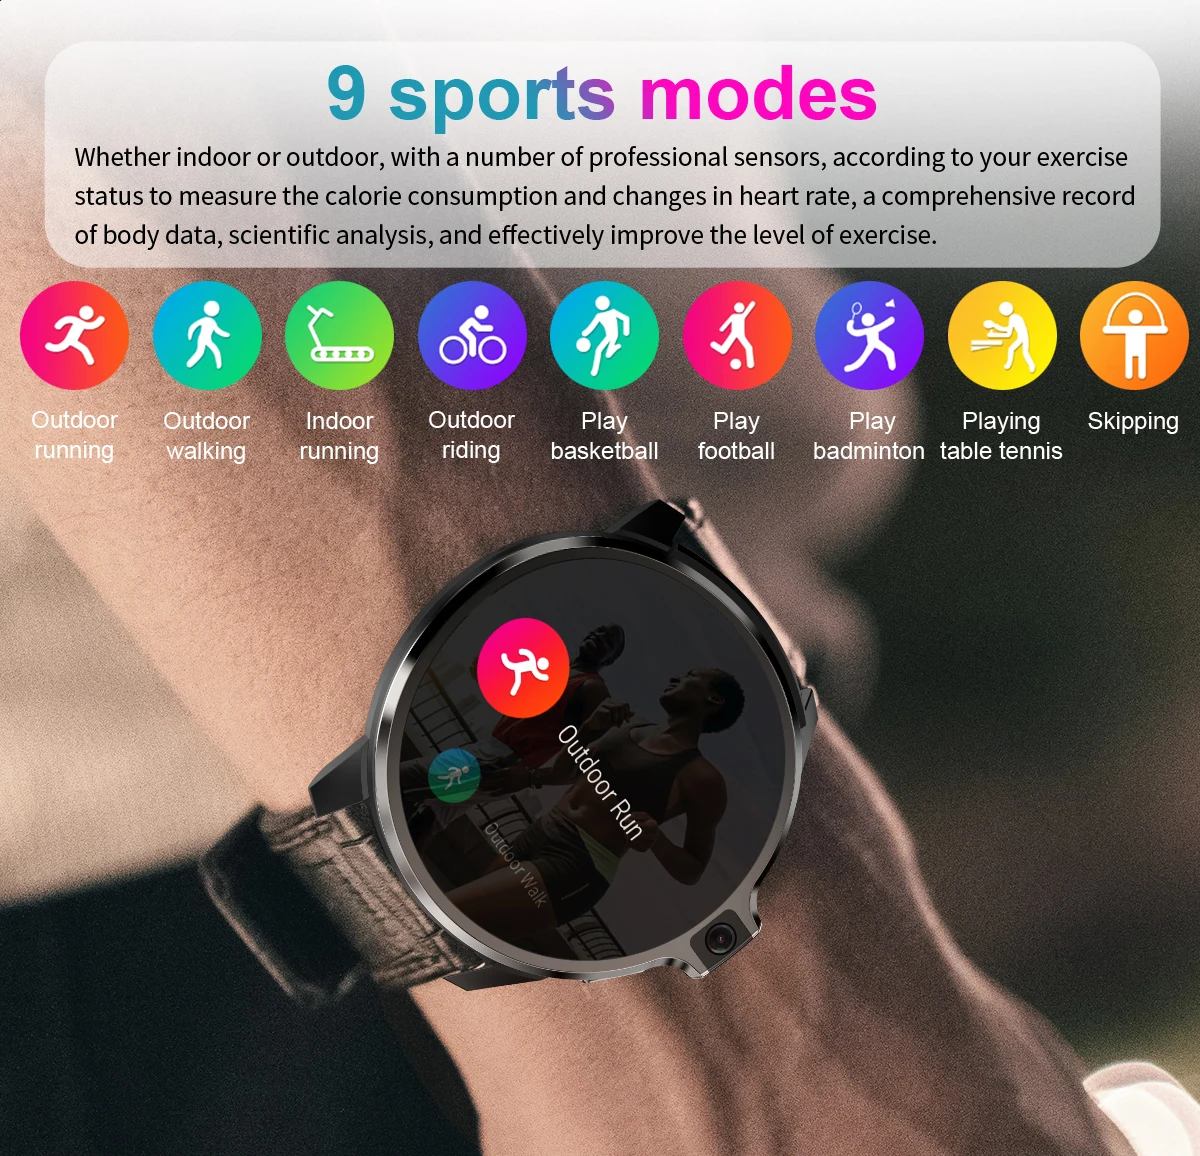 Dual system Smart Watch Android 9.1 Smart Watch 1GB+16GB 4G GPS Wifi Smart Watch Men Smartwatch with Dual Camera Sim Supported